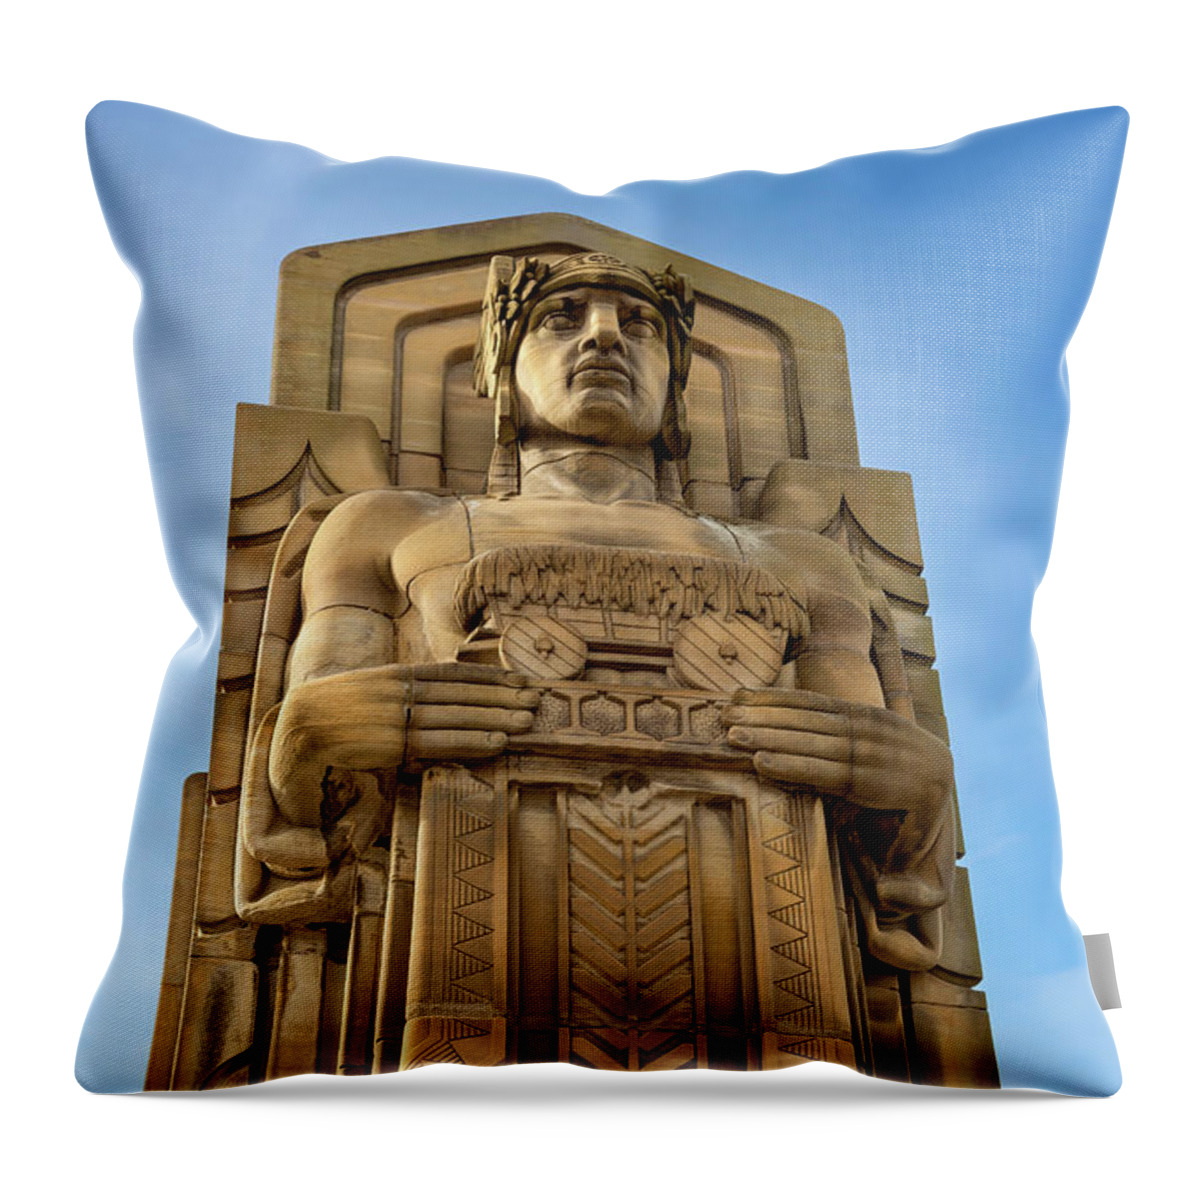 Guardians Of Traffic Hay Wagon Throw Pillow featuring the photograph Guardians Of Traffic Hay Wagon by Dale Kincaid